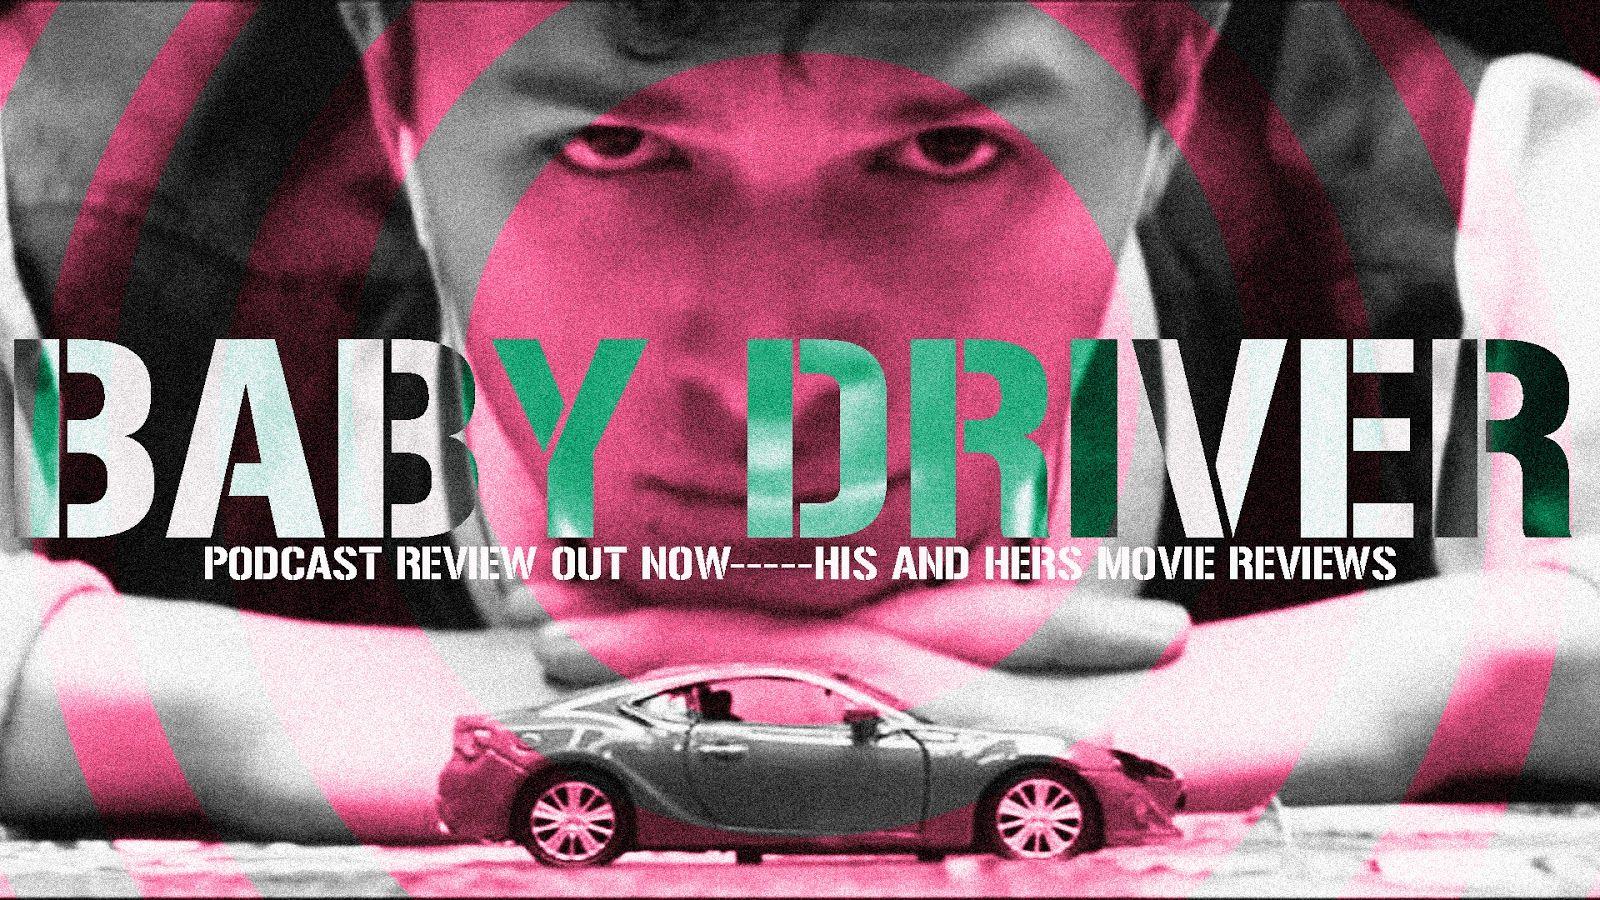 His And Hers Movie Reviews: BABY DRIVER review out now